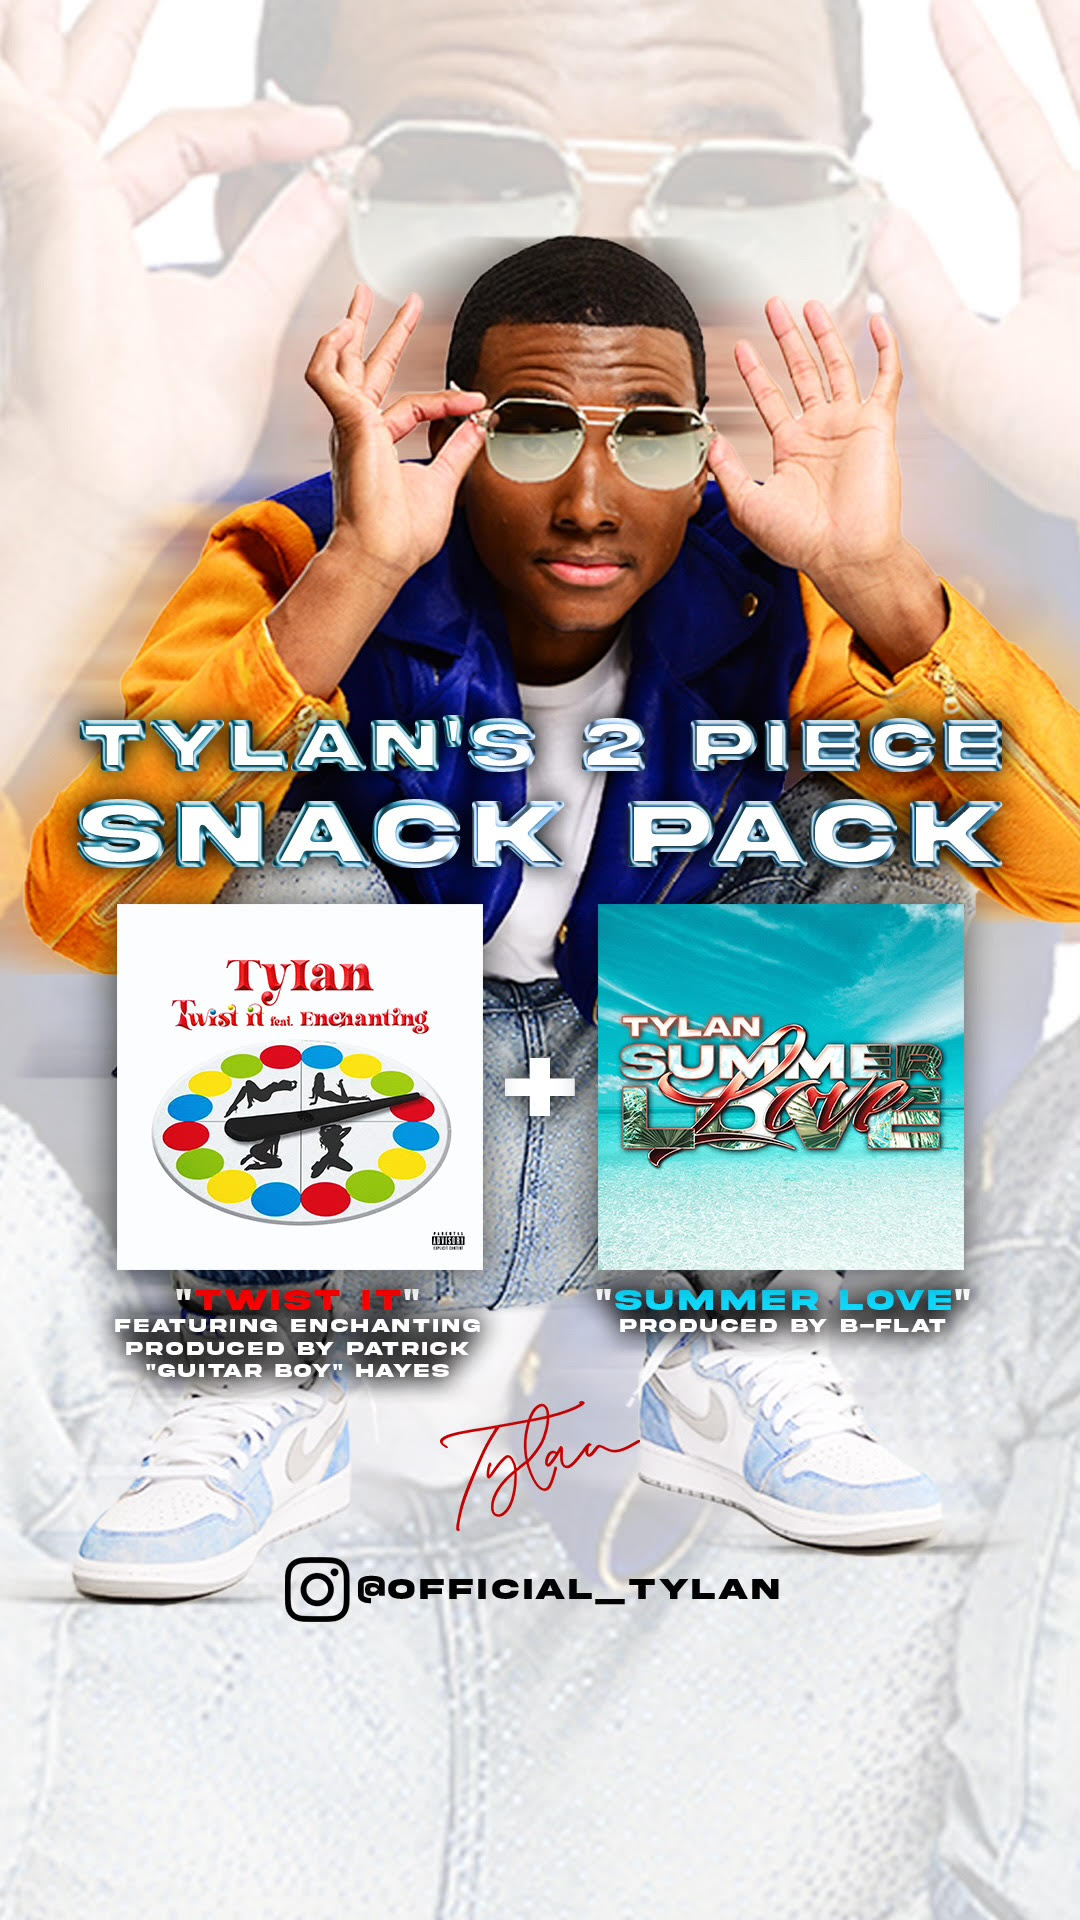 Rising R&B Artist Tylan Releases New ‘2 Piece Snack Pack’ Ft. “Summer Love” & “Twist It”